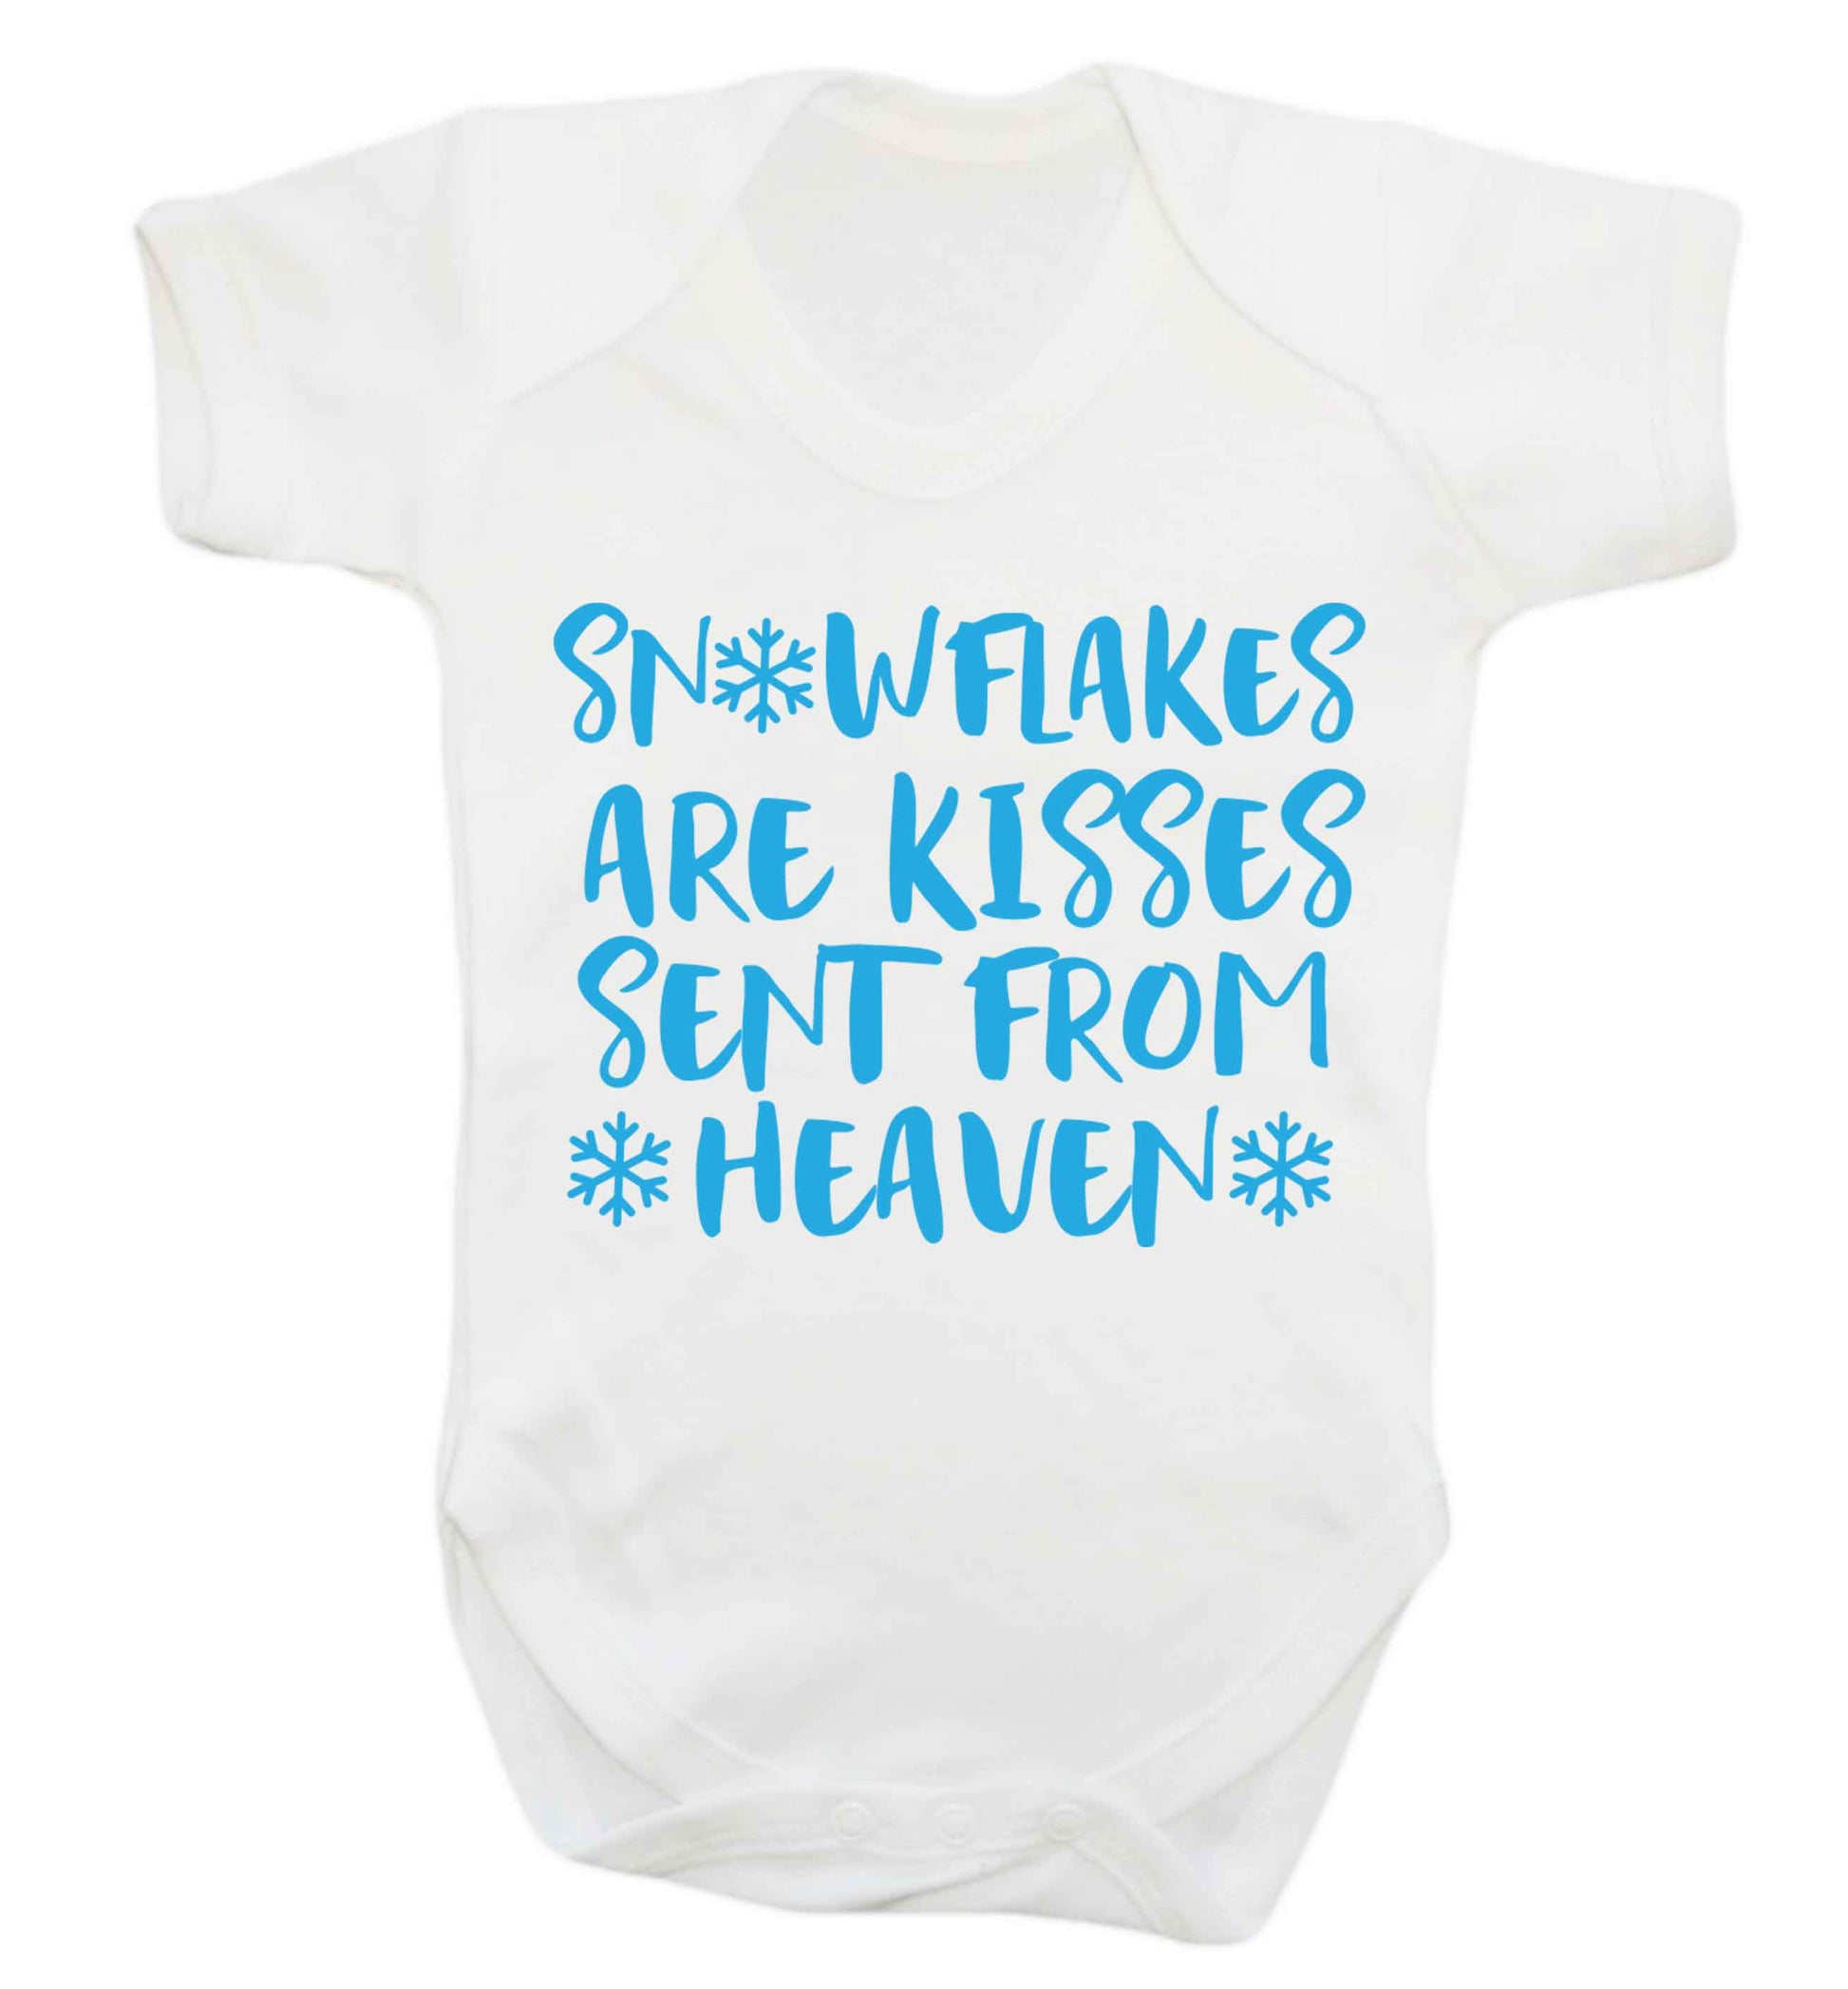 Snowflakes are kisses sent from heaven Baby Vest white 18-24 months